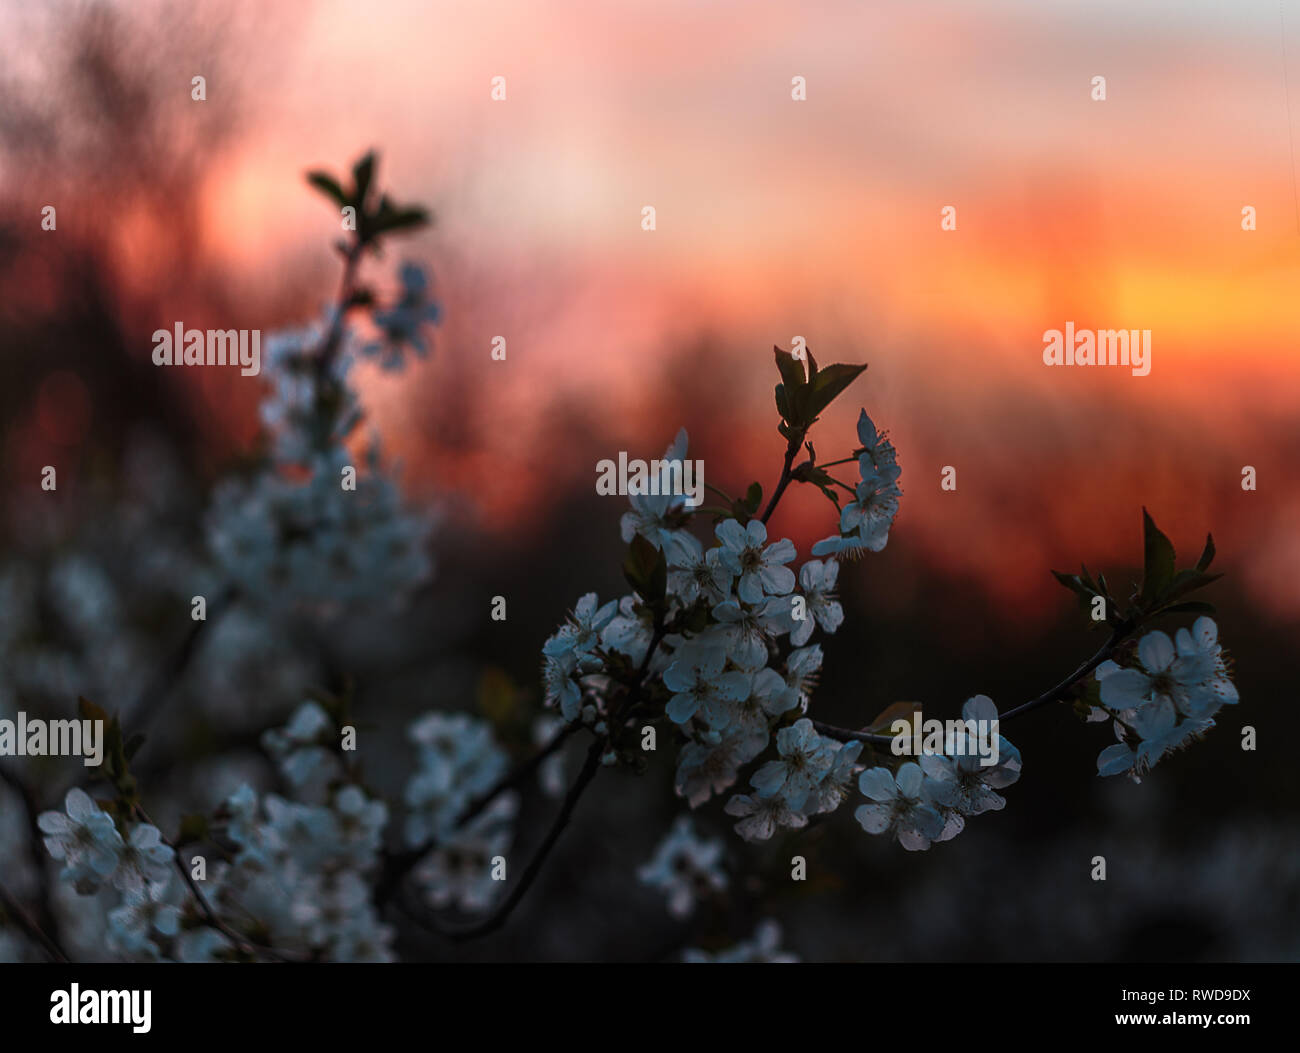 A cherry flowers bloom on the sunset sky background. A spring flowers blossom. Red Sunset evening sky. Flowers, leaves and branches. Stock Photo